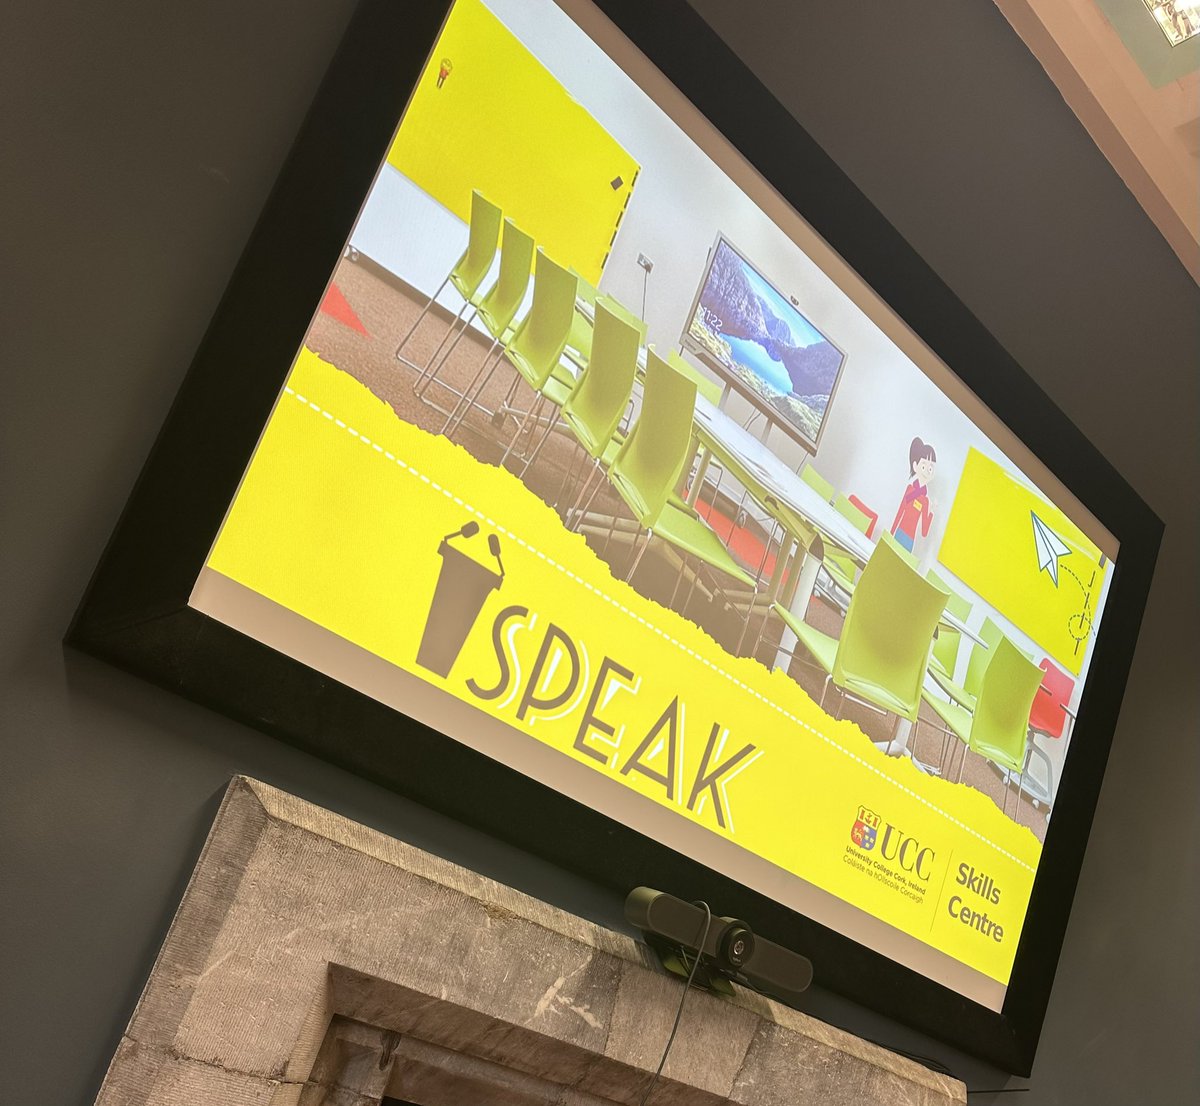 Looking forward to taking part in the “SPEAK: Presentation skills Digital Badge” series over the next 7 weeks with @UccSkills. Upskilling in the areas of public speaking/communicating research is definitely one of my goals coming towards the end of semester 2, year 1!